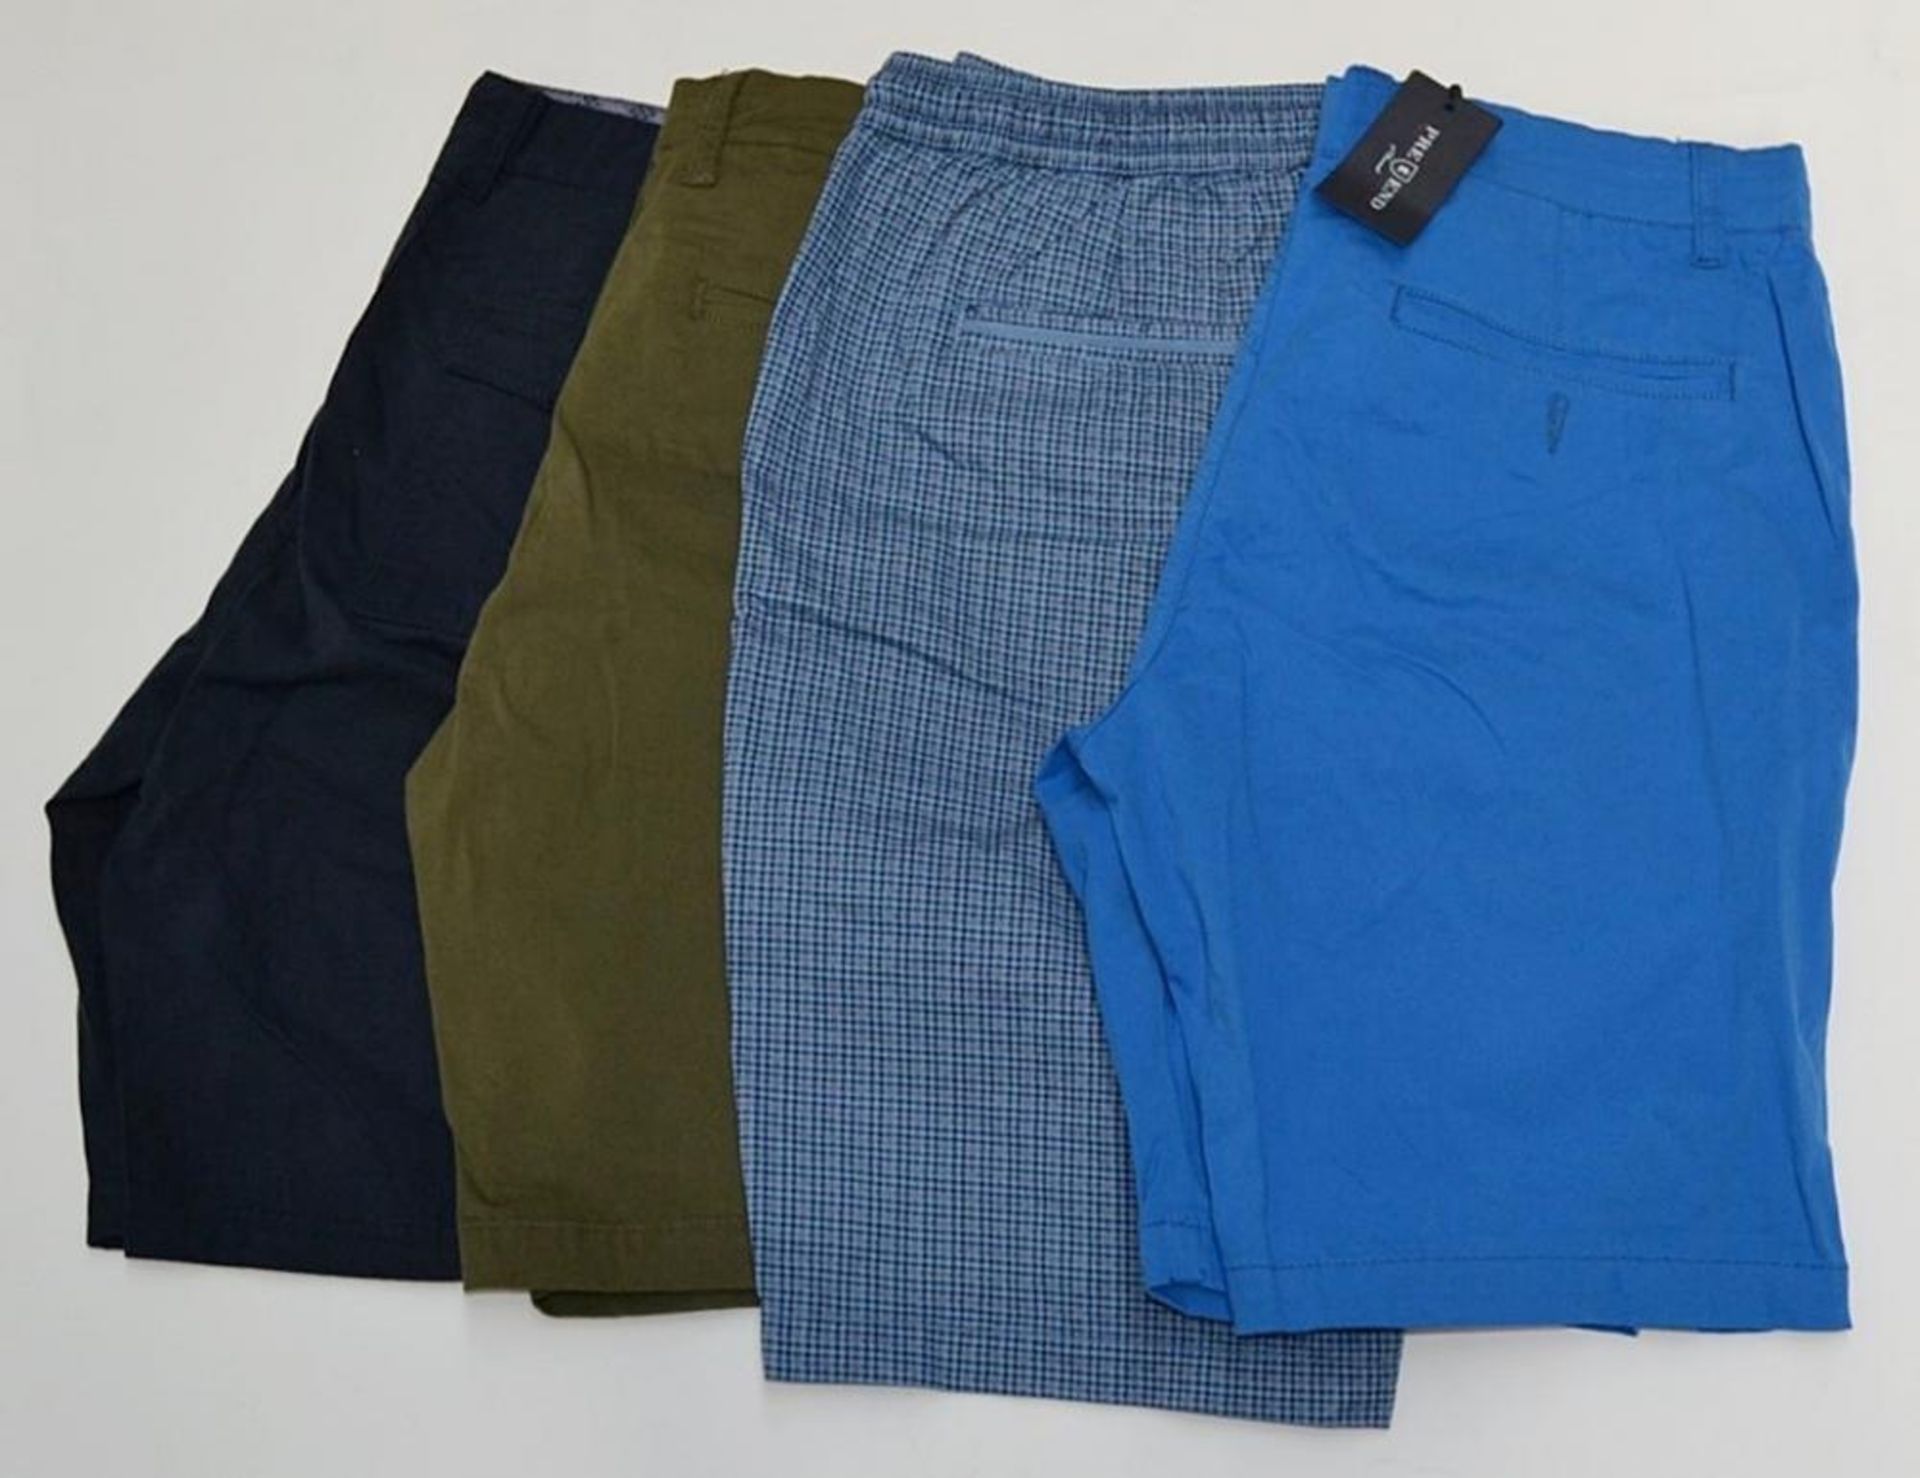 4 x Assorted Pairs Of PRE END Branded Mens Cotton Shorts - New Stock With Tags - Recent Retail Closu